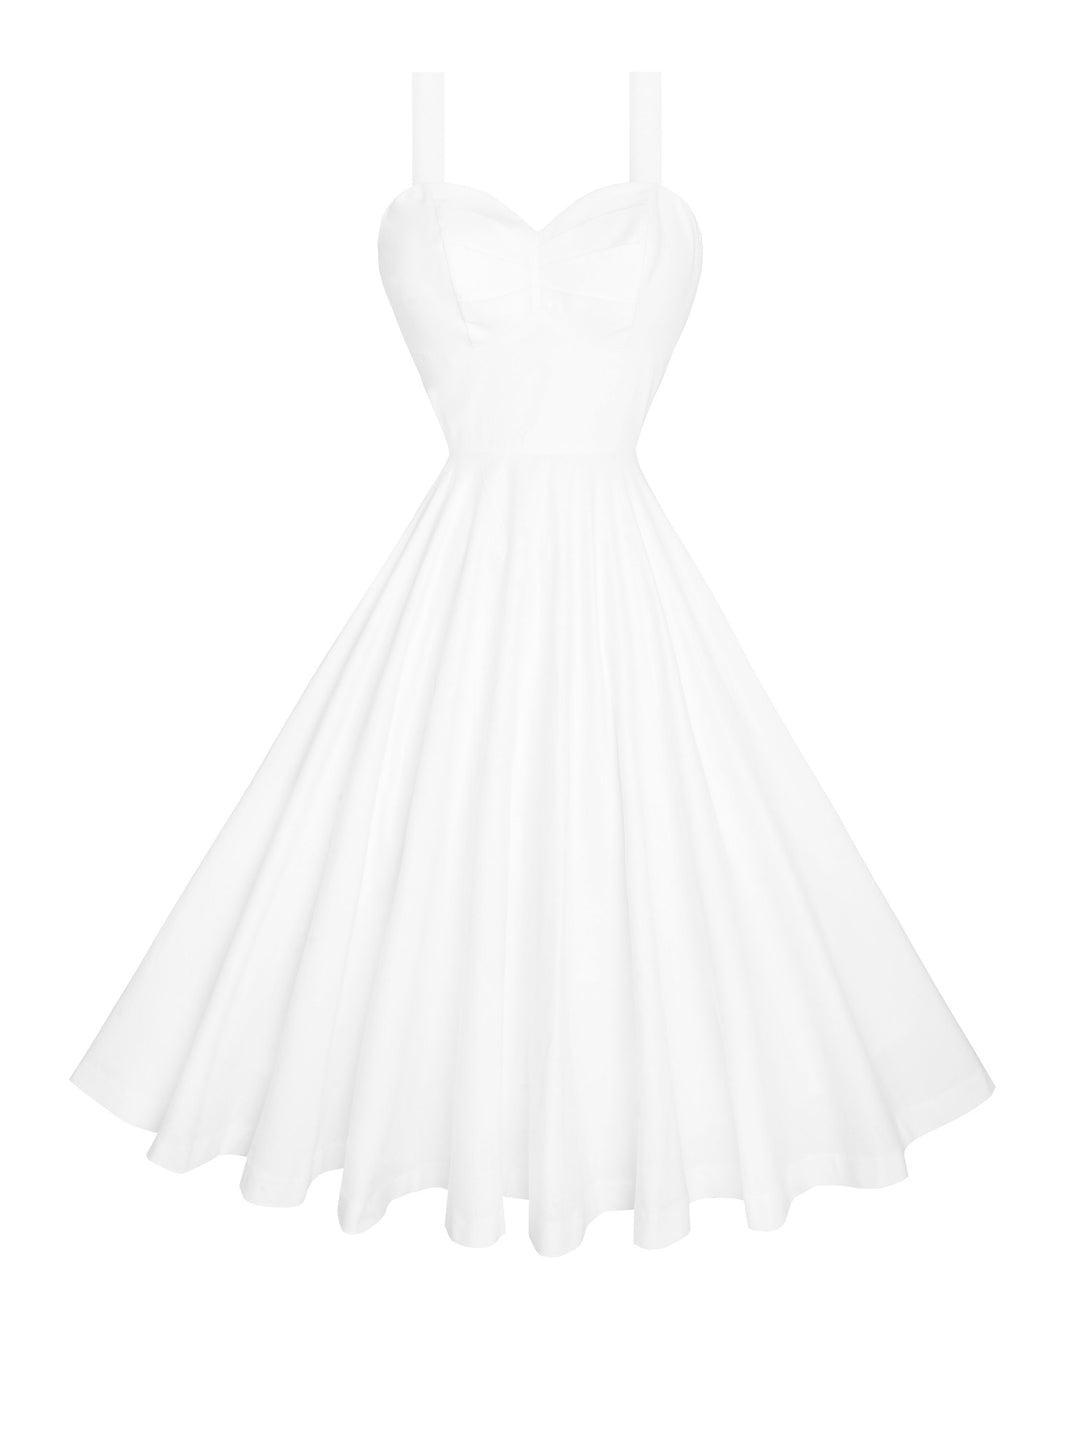 RTS - Size S - Catalina Dress in White Cotton